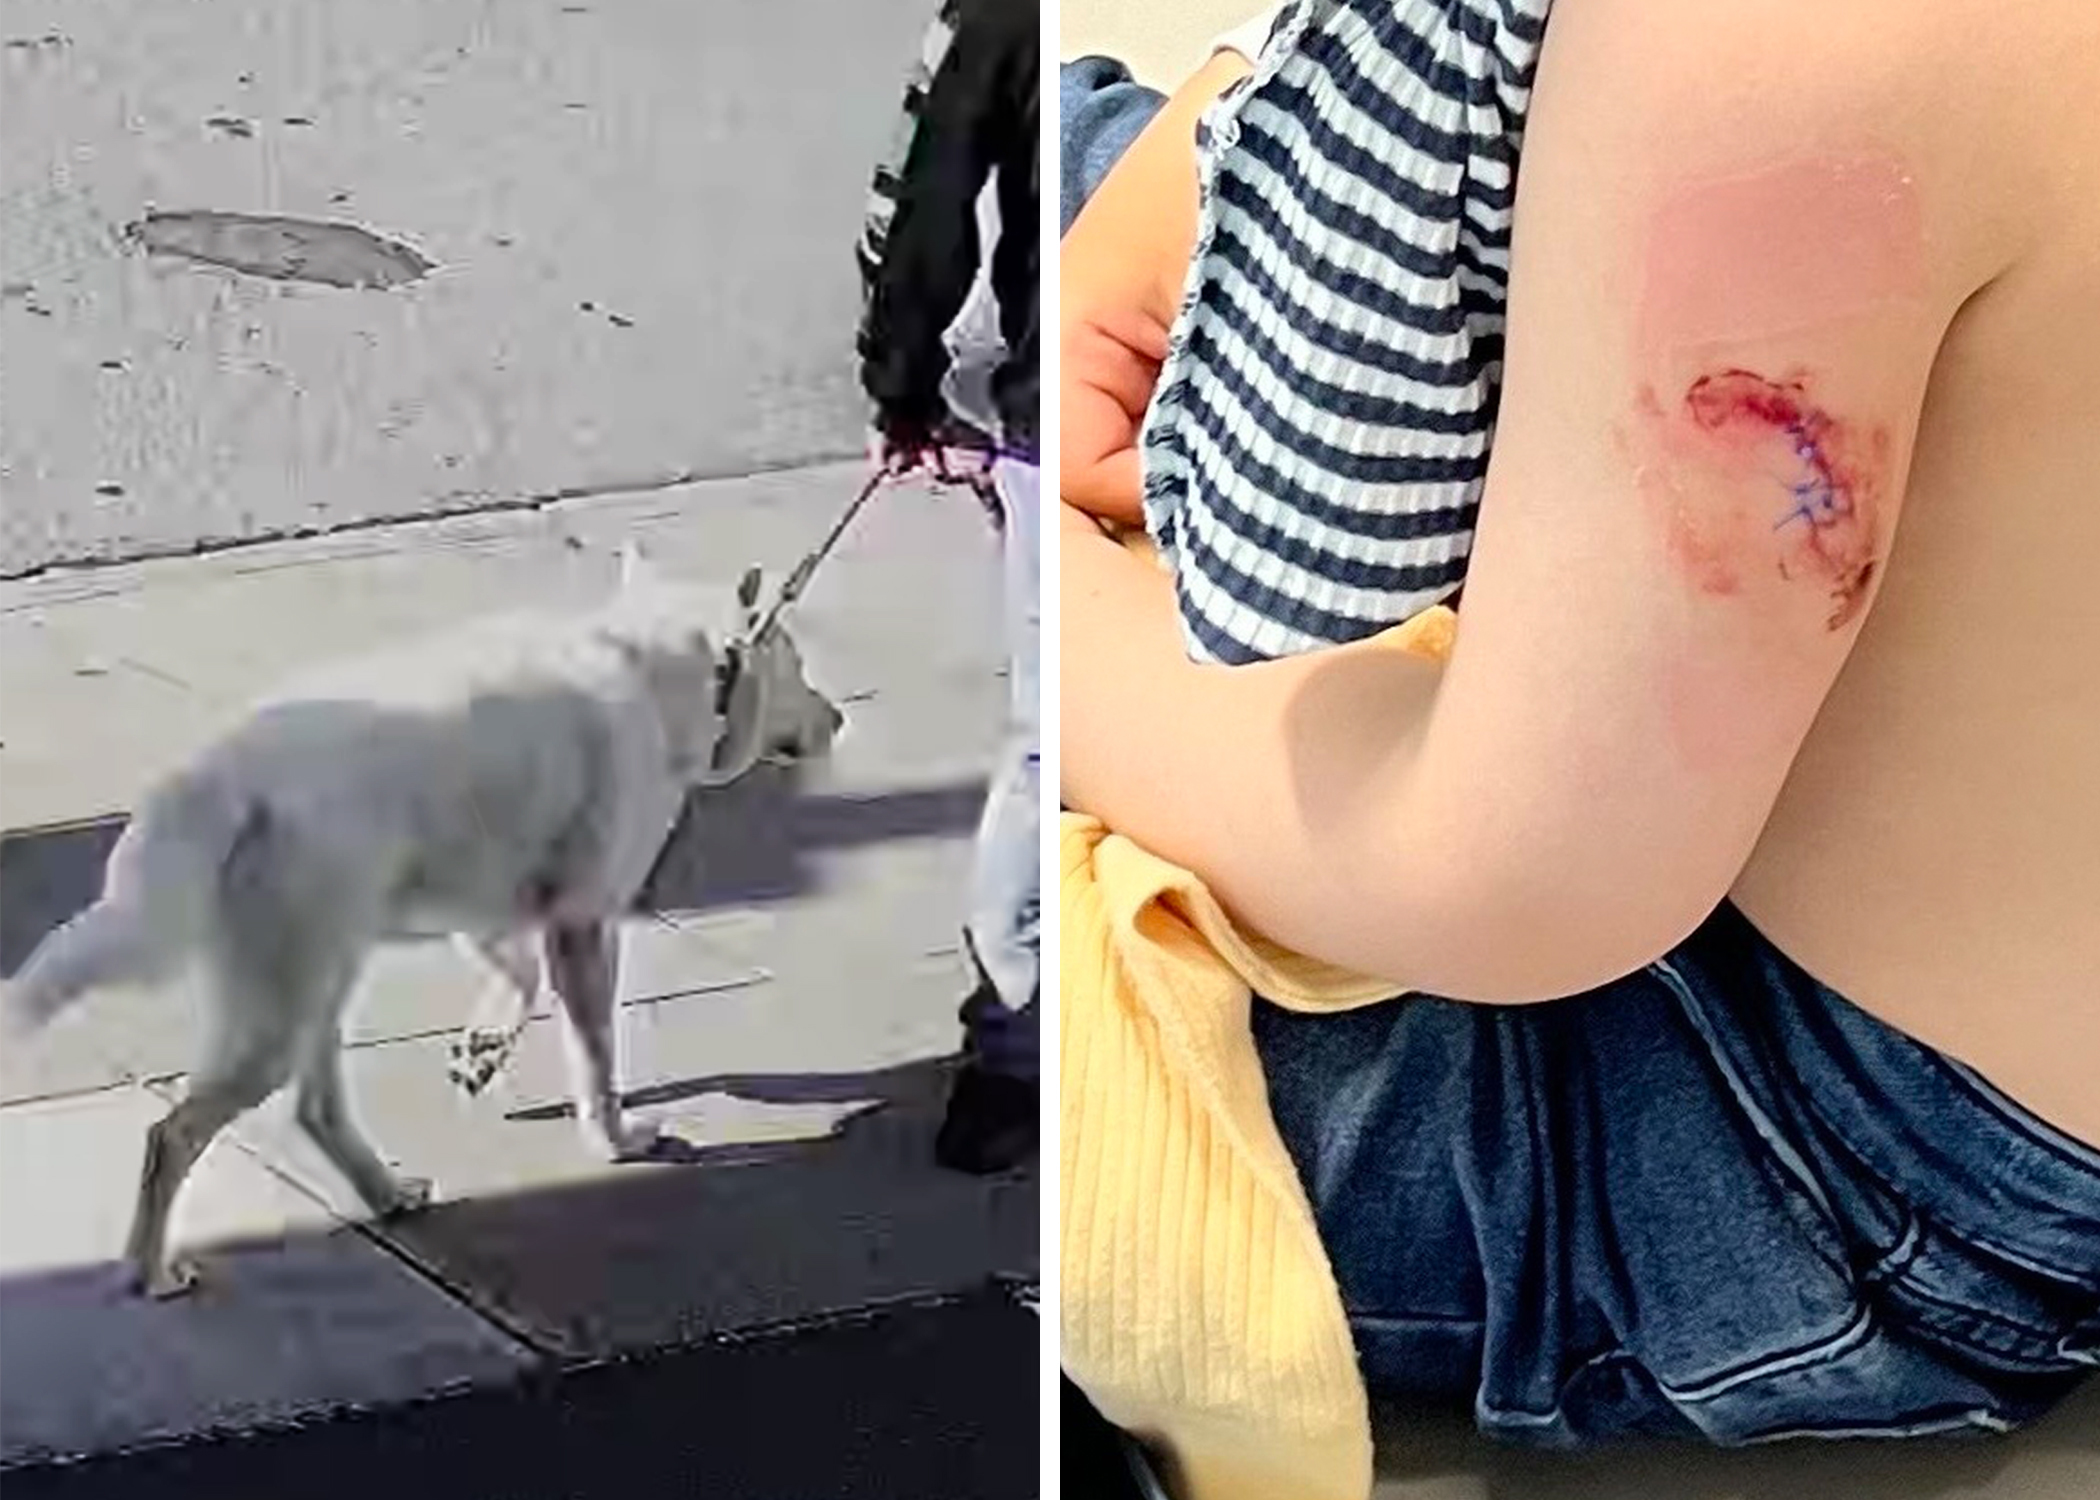 The image shows a white dog on a leash, and a close-up of an injured arm with a bandage and a wound with stitches.